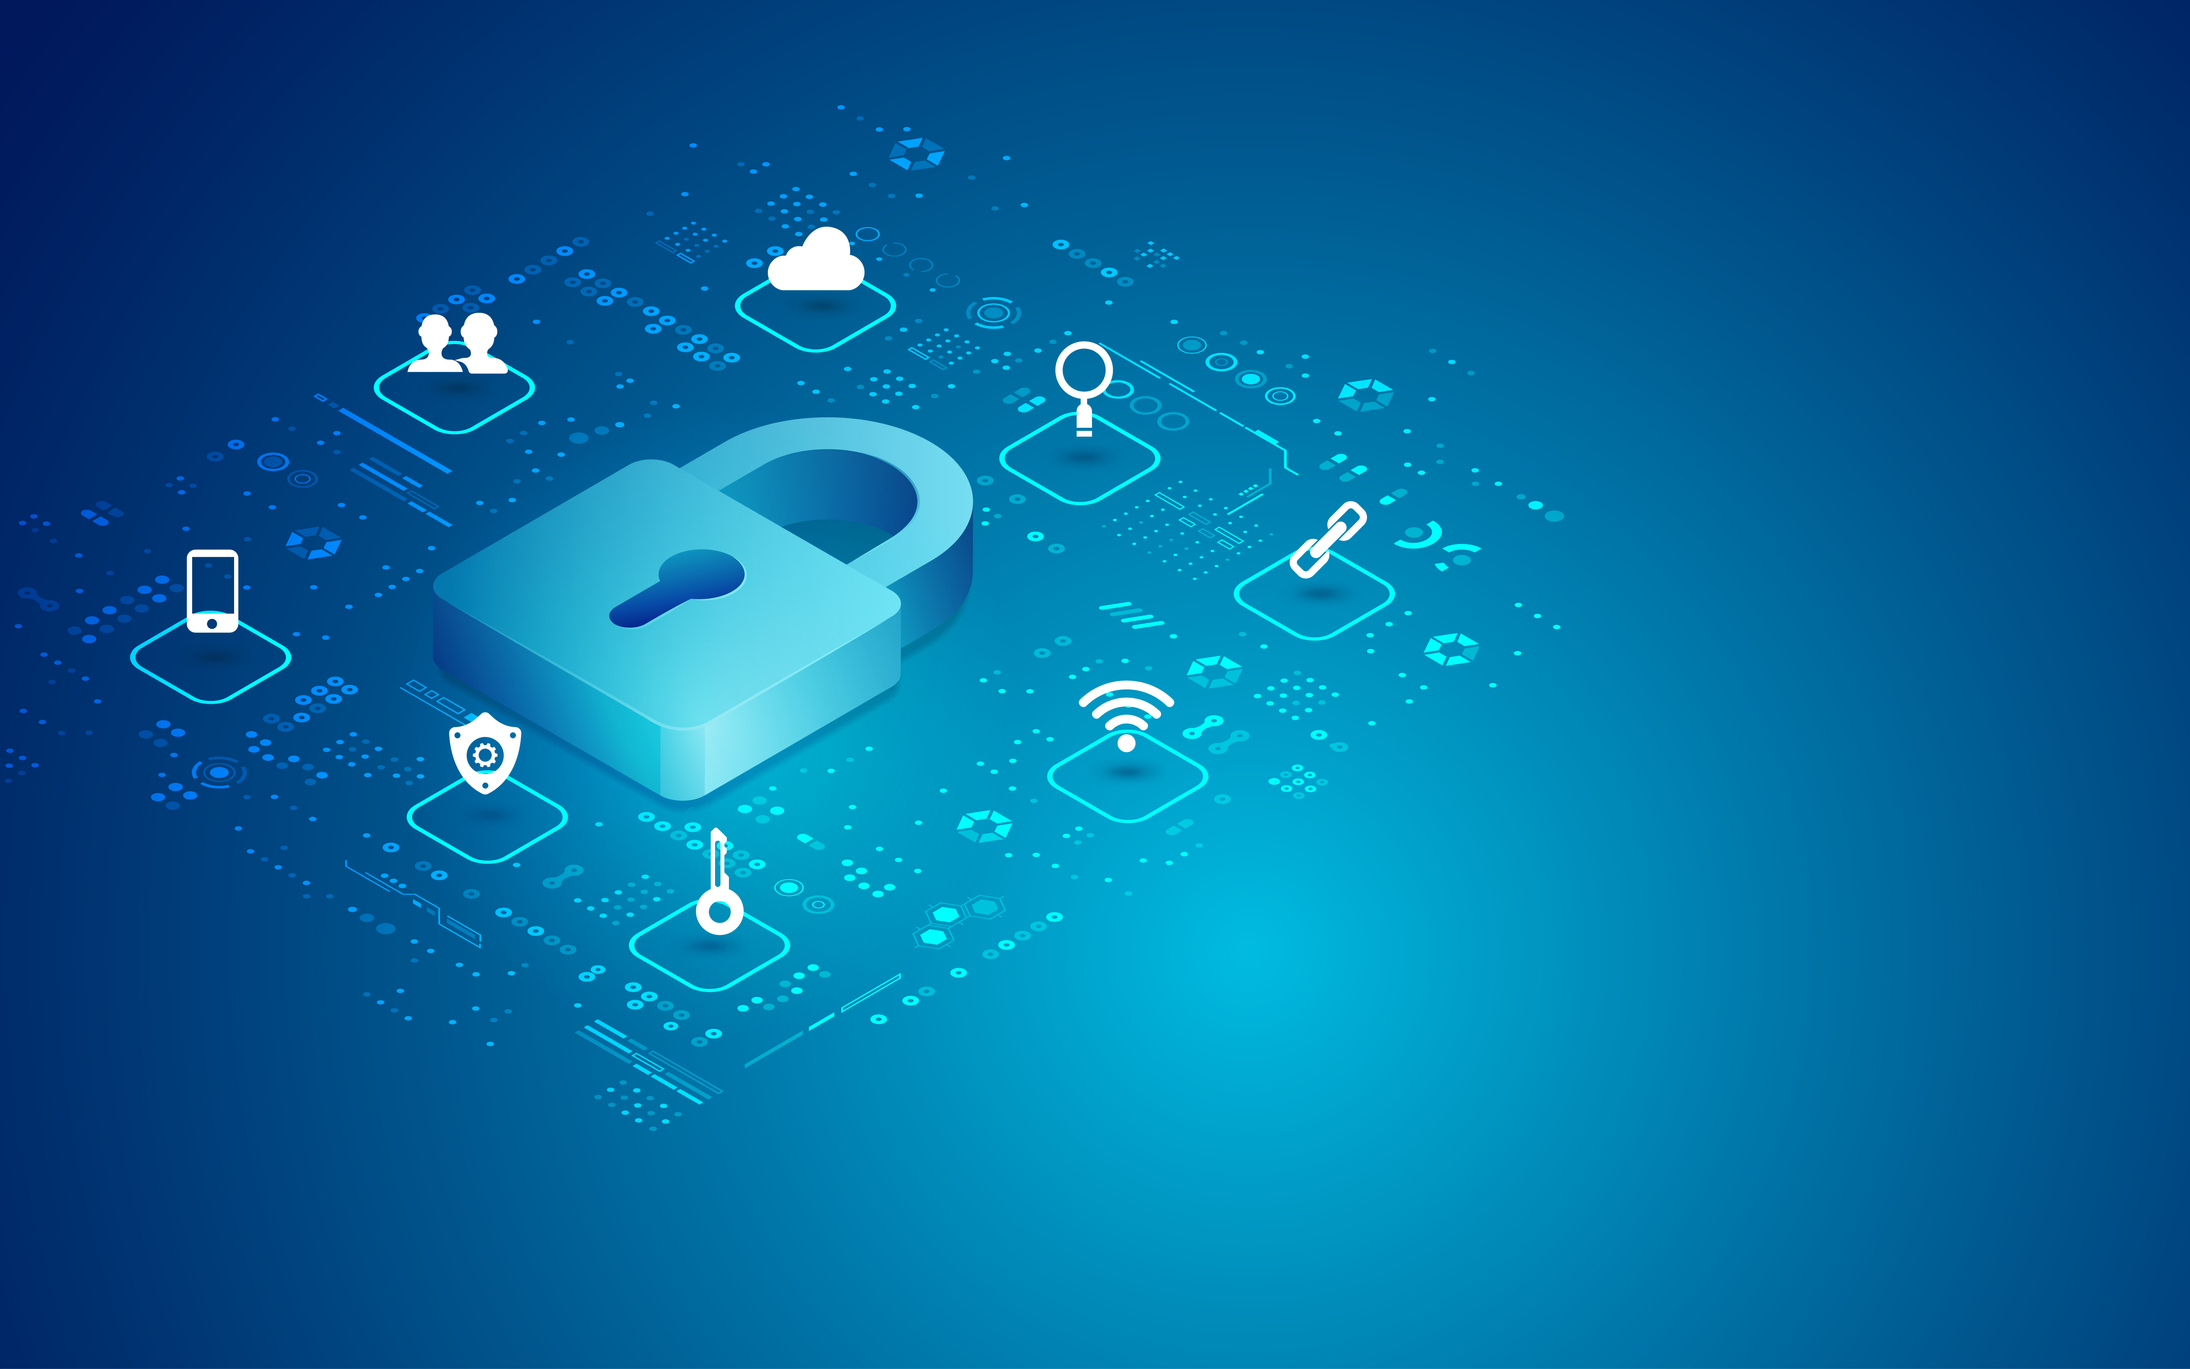 Padlock and digital icons as a cybersecurity concept, representing what is required by the Cybersecurity Maturity Model Certification (CMMC) for defense contractors.